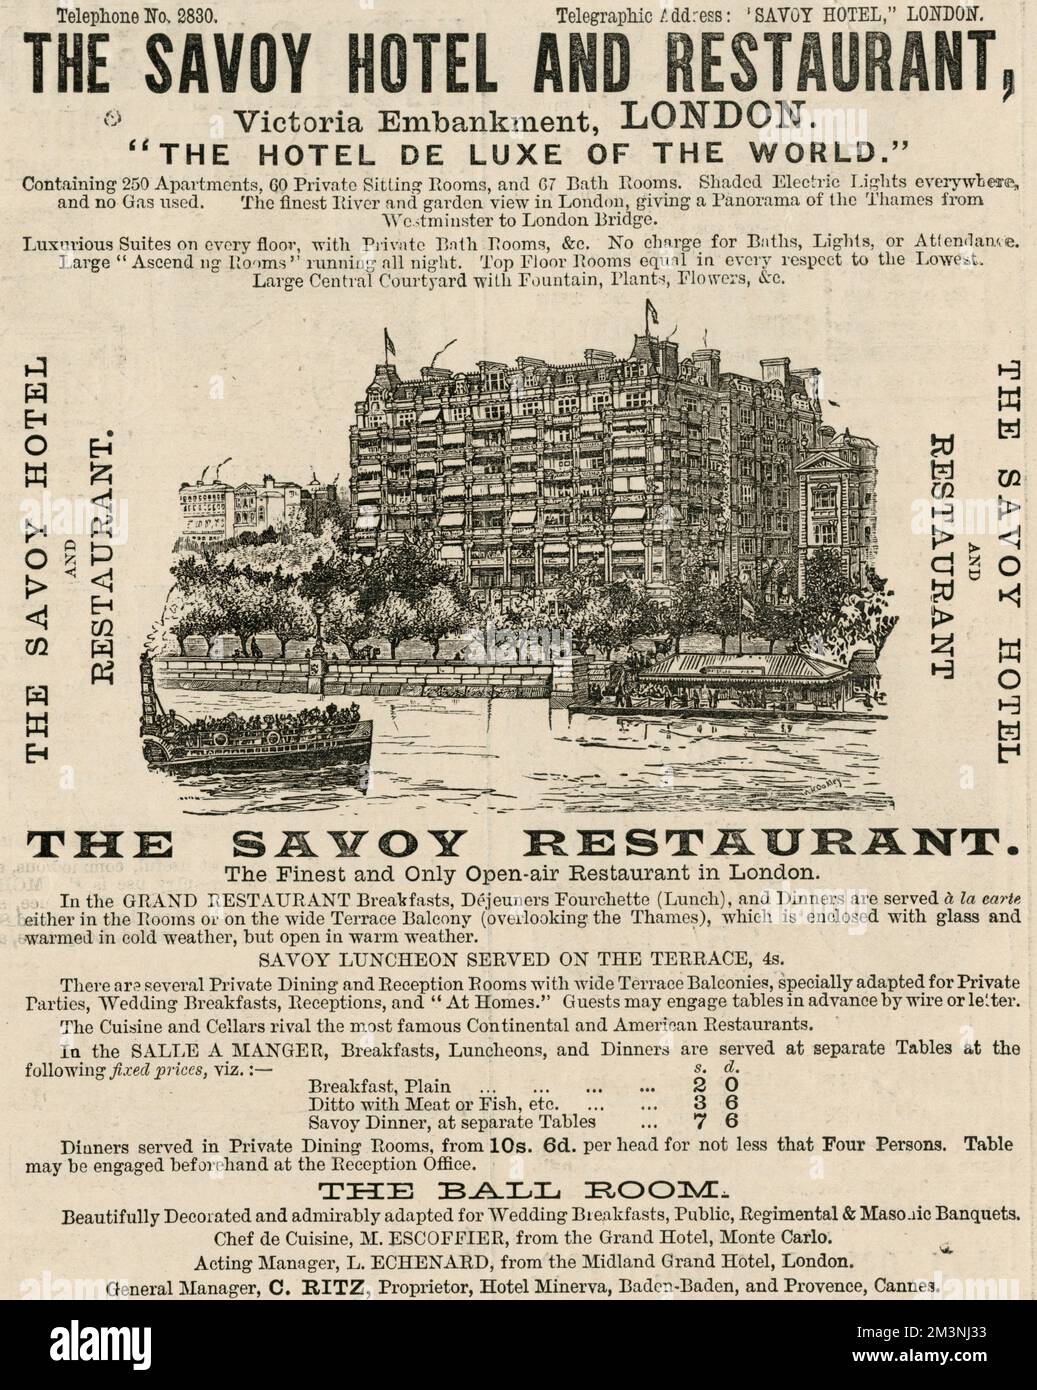 Savoy Hotel Advert for the hotel and restaurant in London  proclaiming it to be the Hotel De Luxe of the World.     Date: 1890 Stock Photo